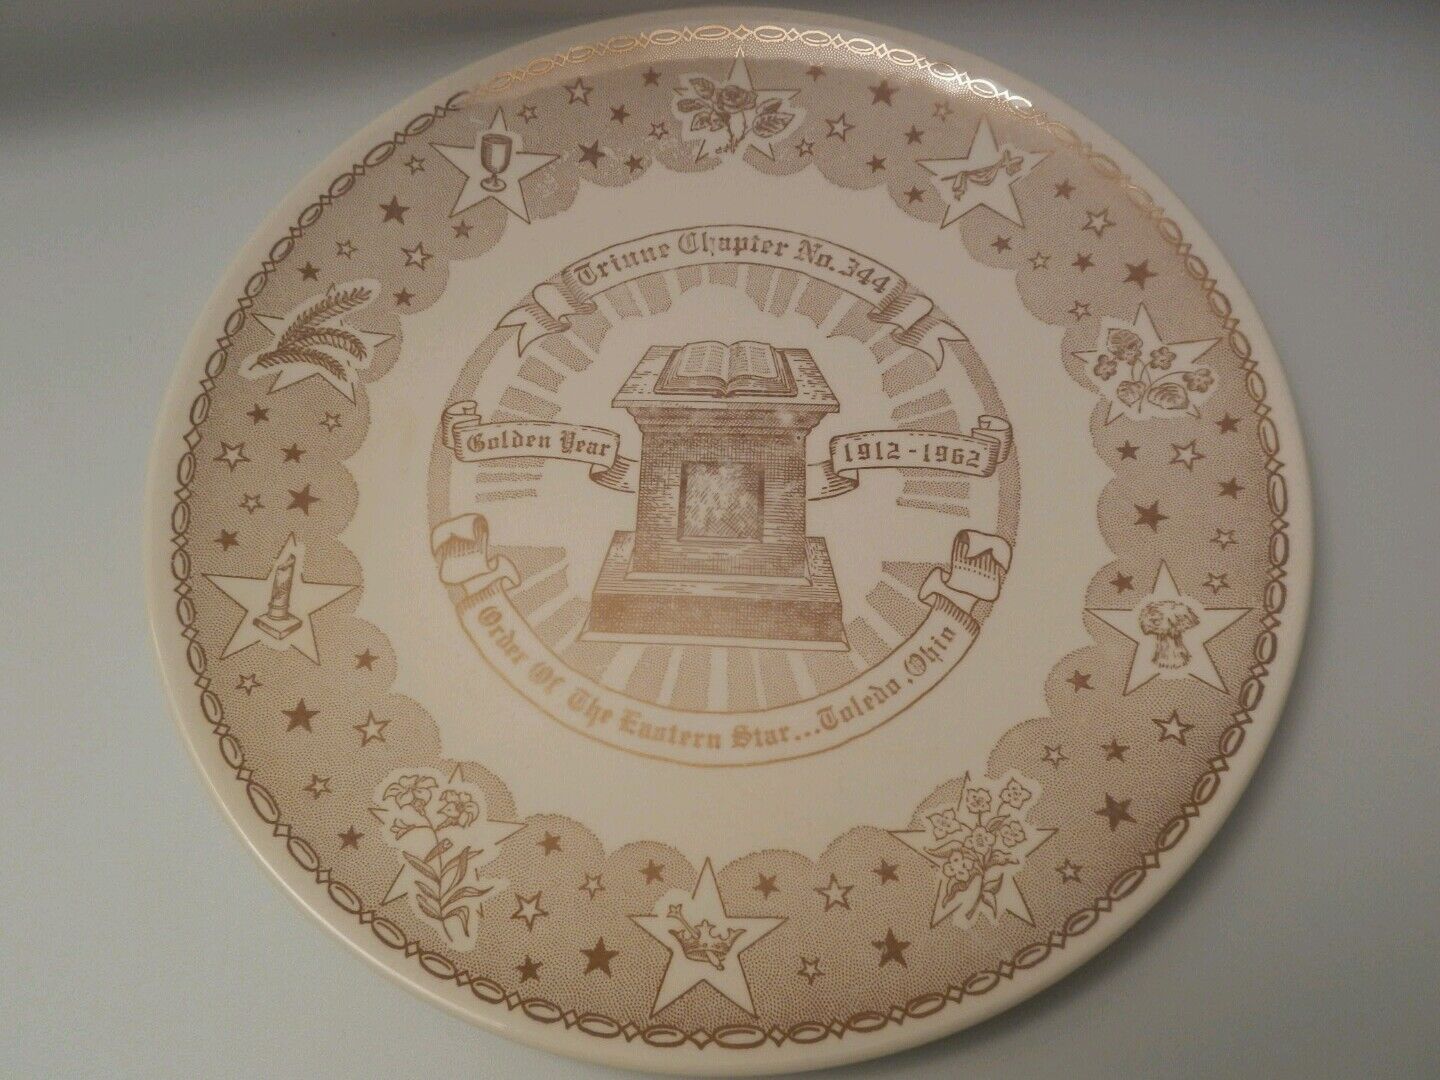 Order of the eastern star toledo ohio Golden year commemorative plate gold 